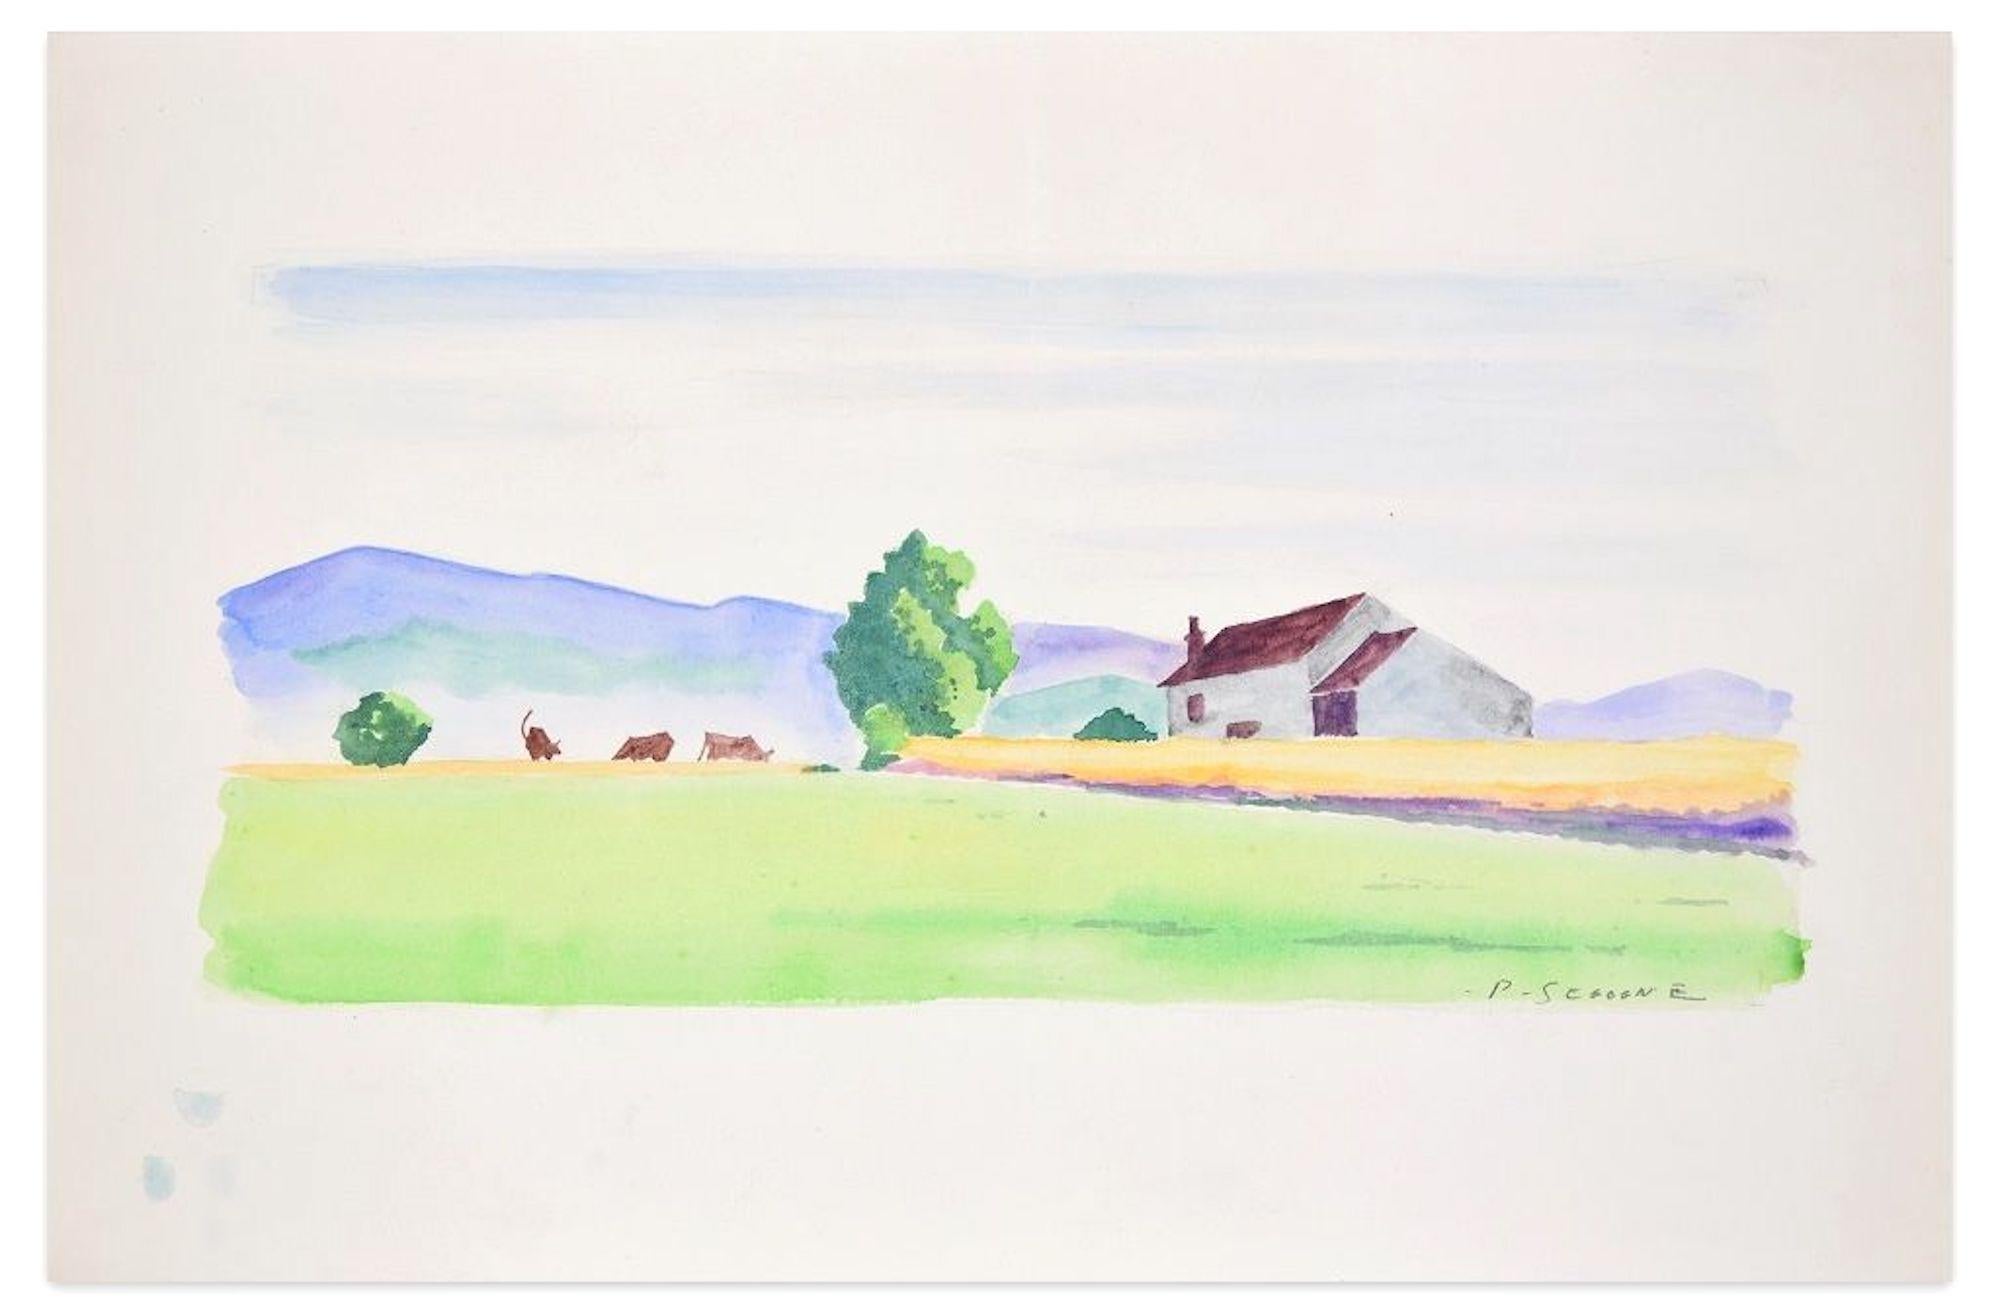 Countryside is an original artwork, realized by Pierre Segogne in the 1950s. 

Hand-signed on lower right margin.

Mixed colored watercolor on paper. 

This beautiful artwork represents a very peaceful countryside landscape, with a farmhouse and